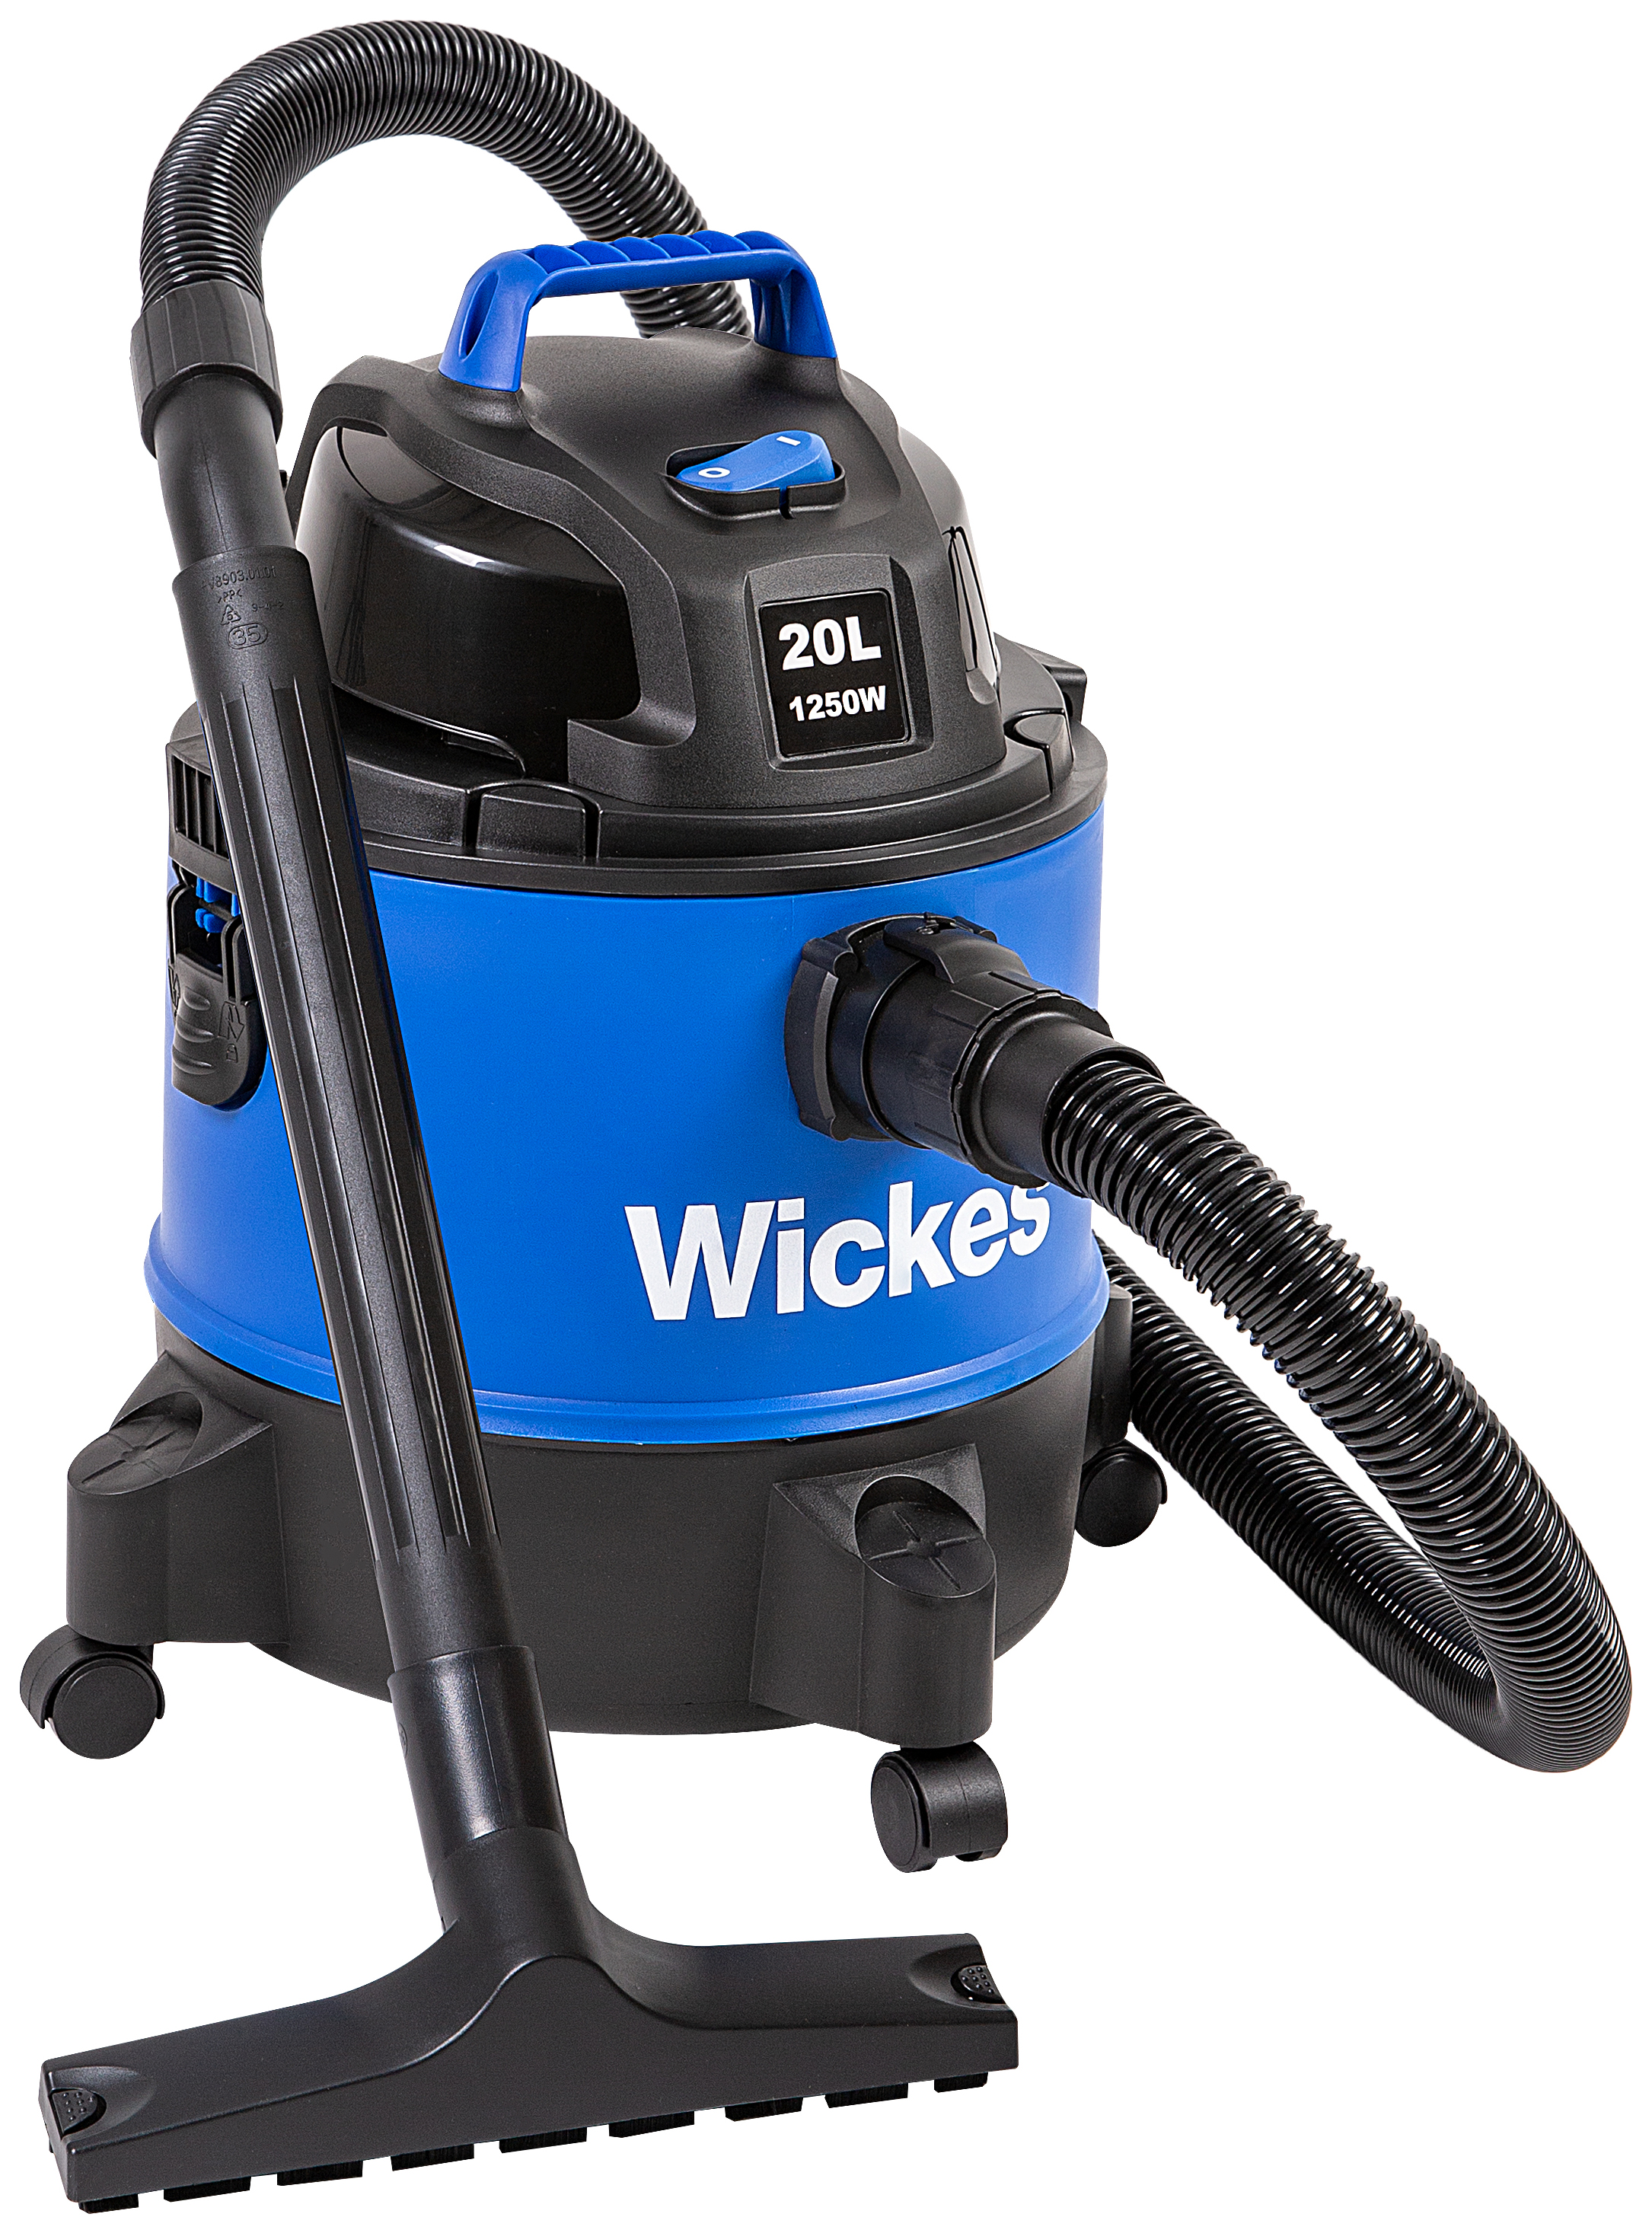 Image of Wickes Wet & Dry Vacuum Cleaner With Blower 20L - 1250W